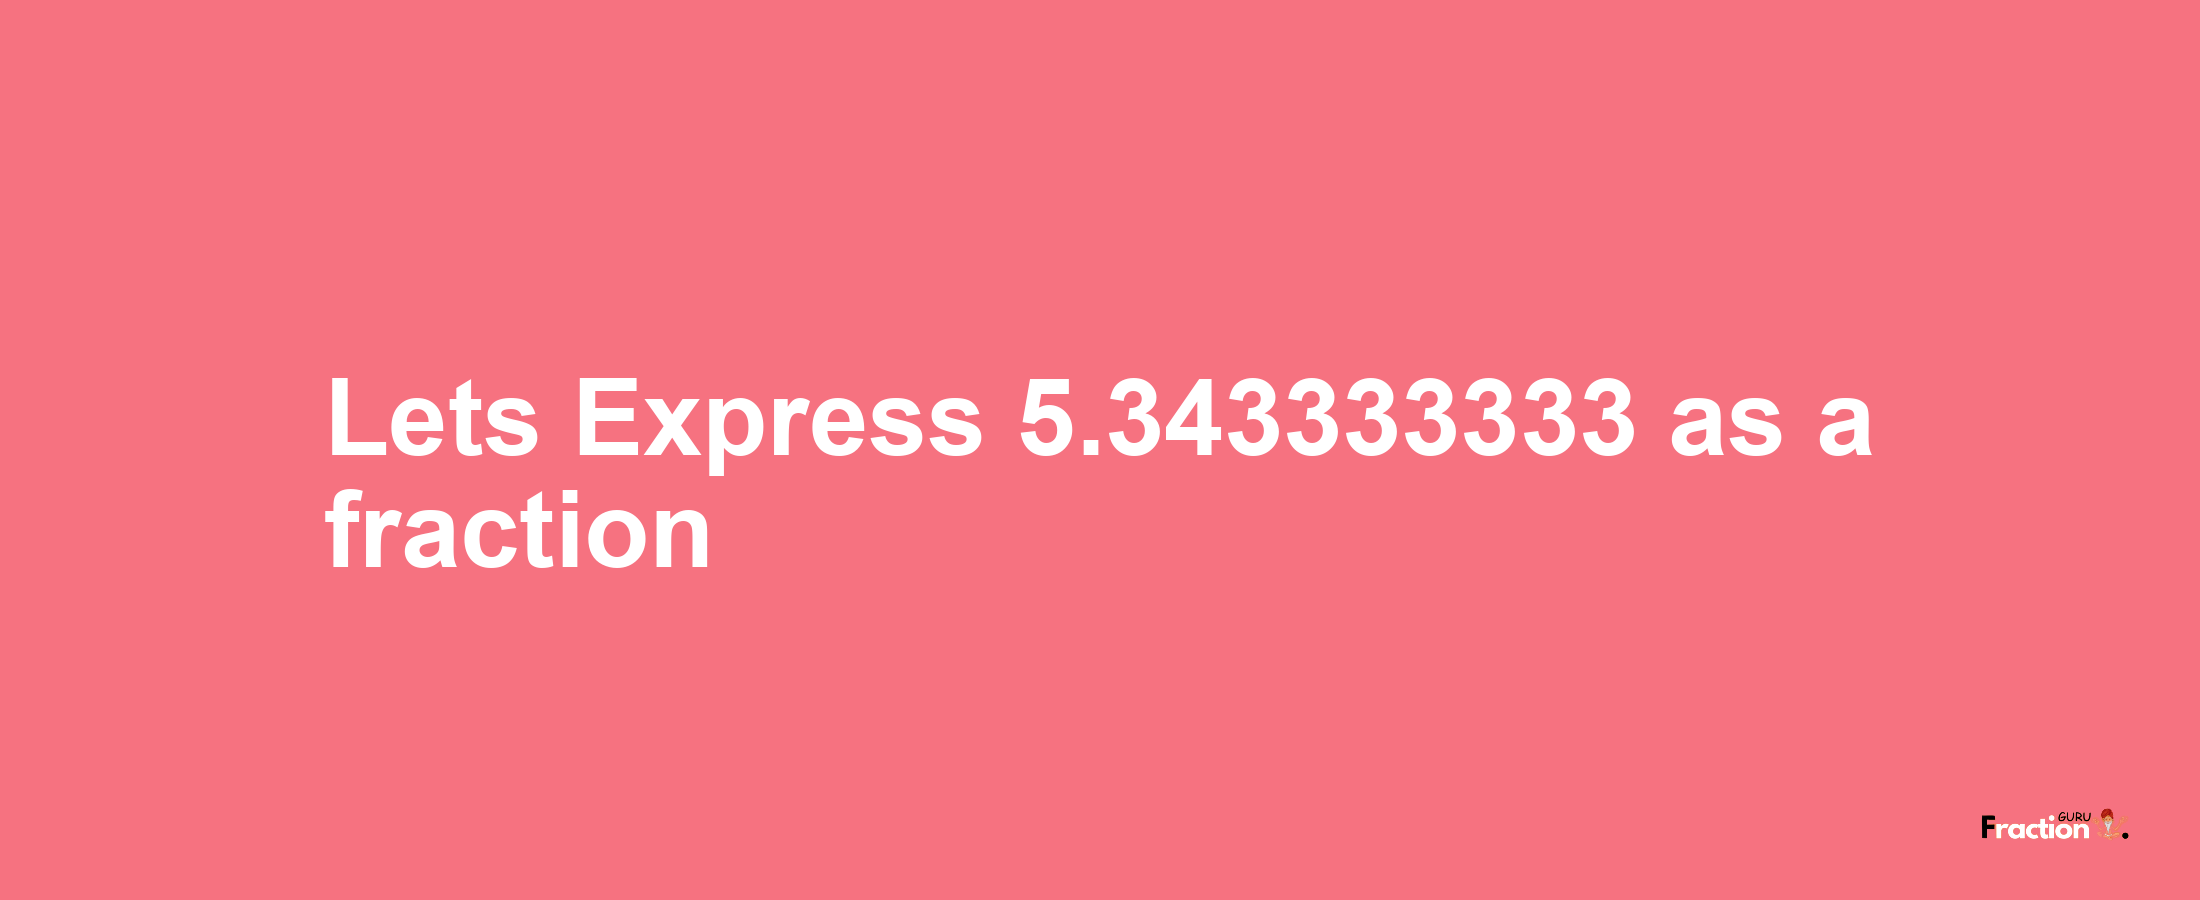 Lets Express 5.343333333 as afraction